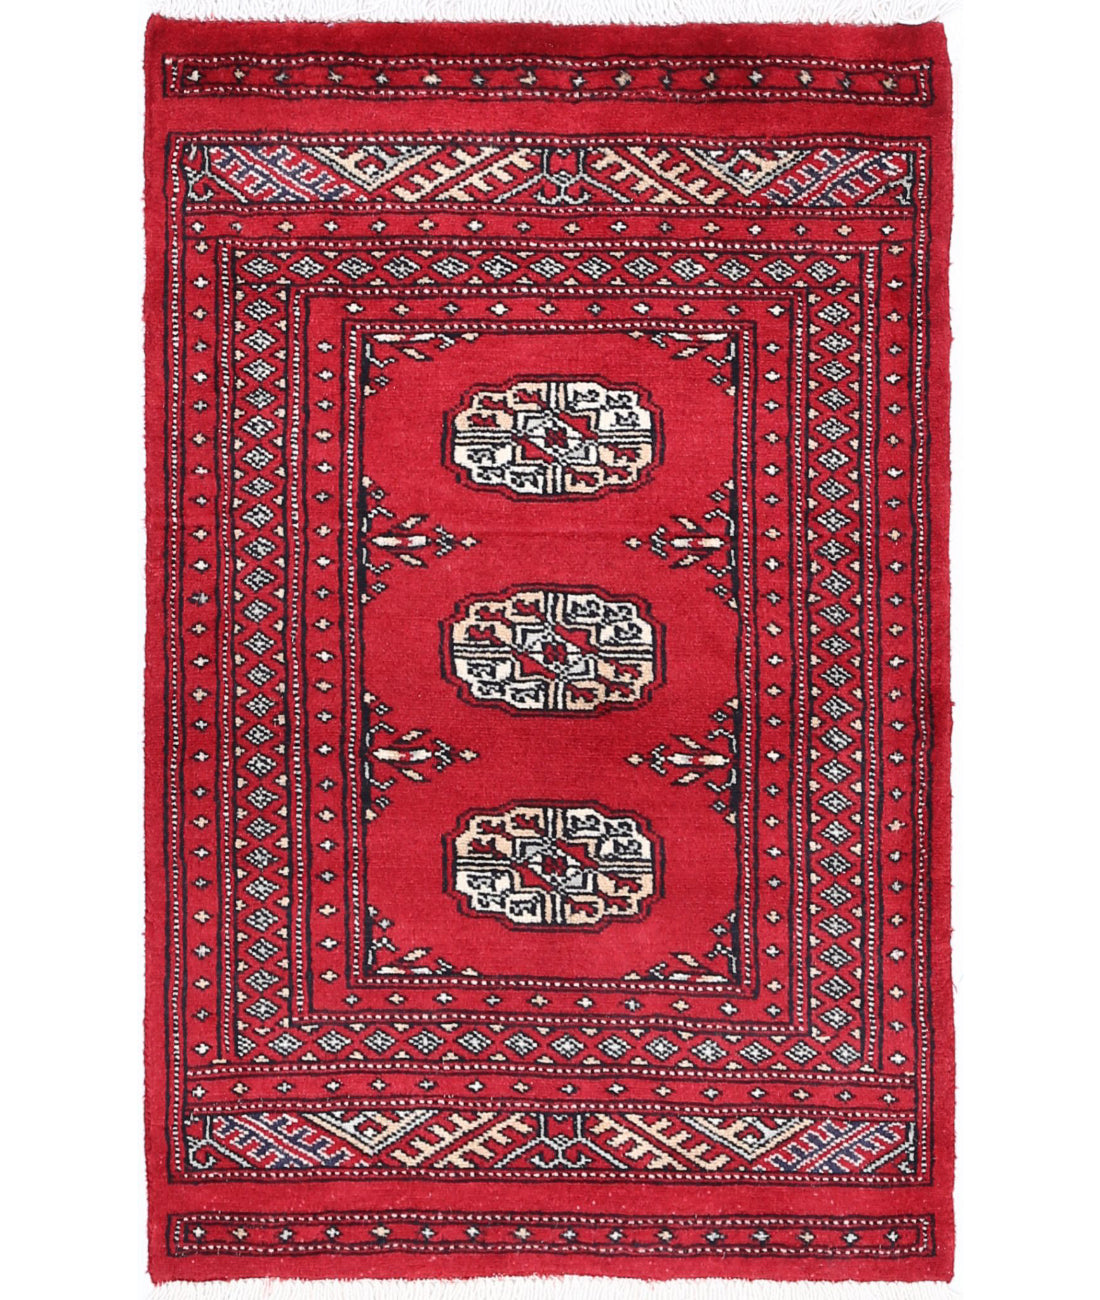 Hand Knotted Tribal Bokhara Wool Rug - 1&#39;11&#39;&#39; x 3&#39;2&#39;&#39; 1&#39;11&#39;&#39; x 3&#39;2&#39;&#39; (58 X 95) / Red / Red